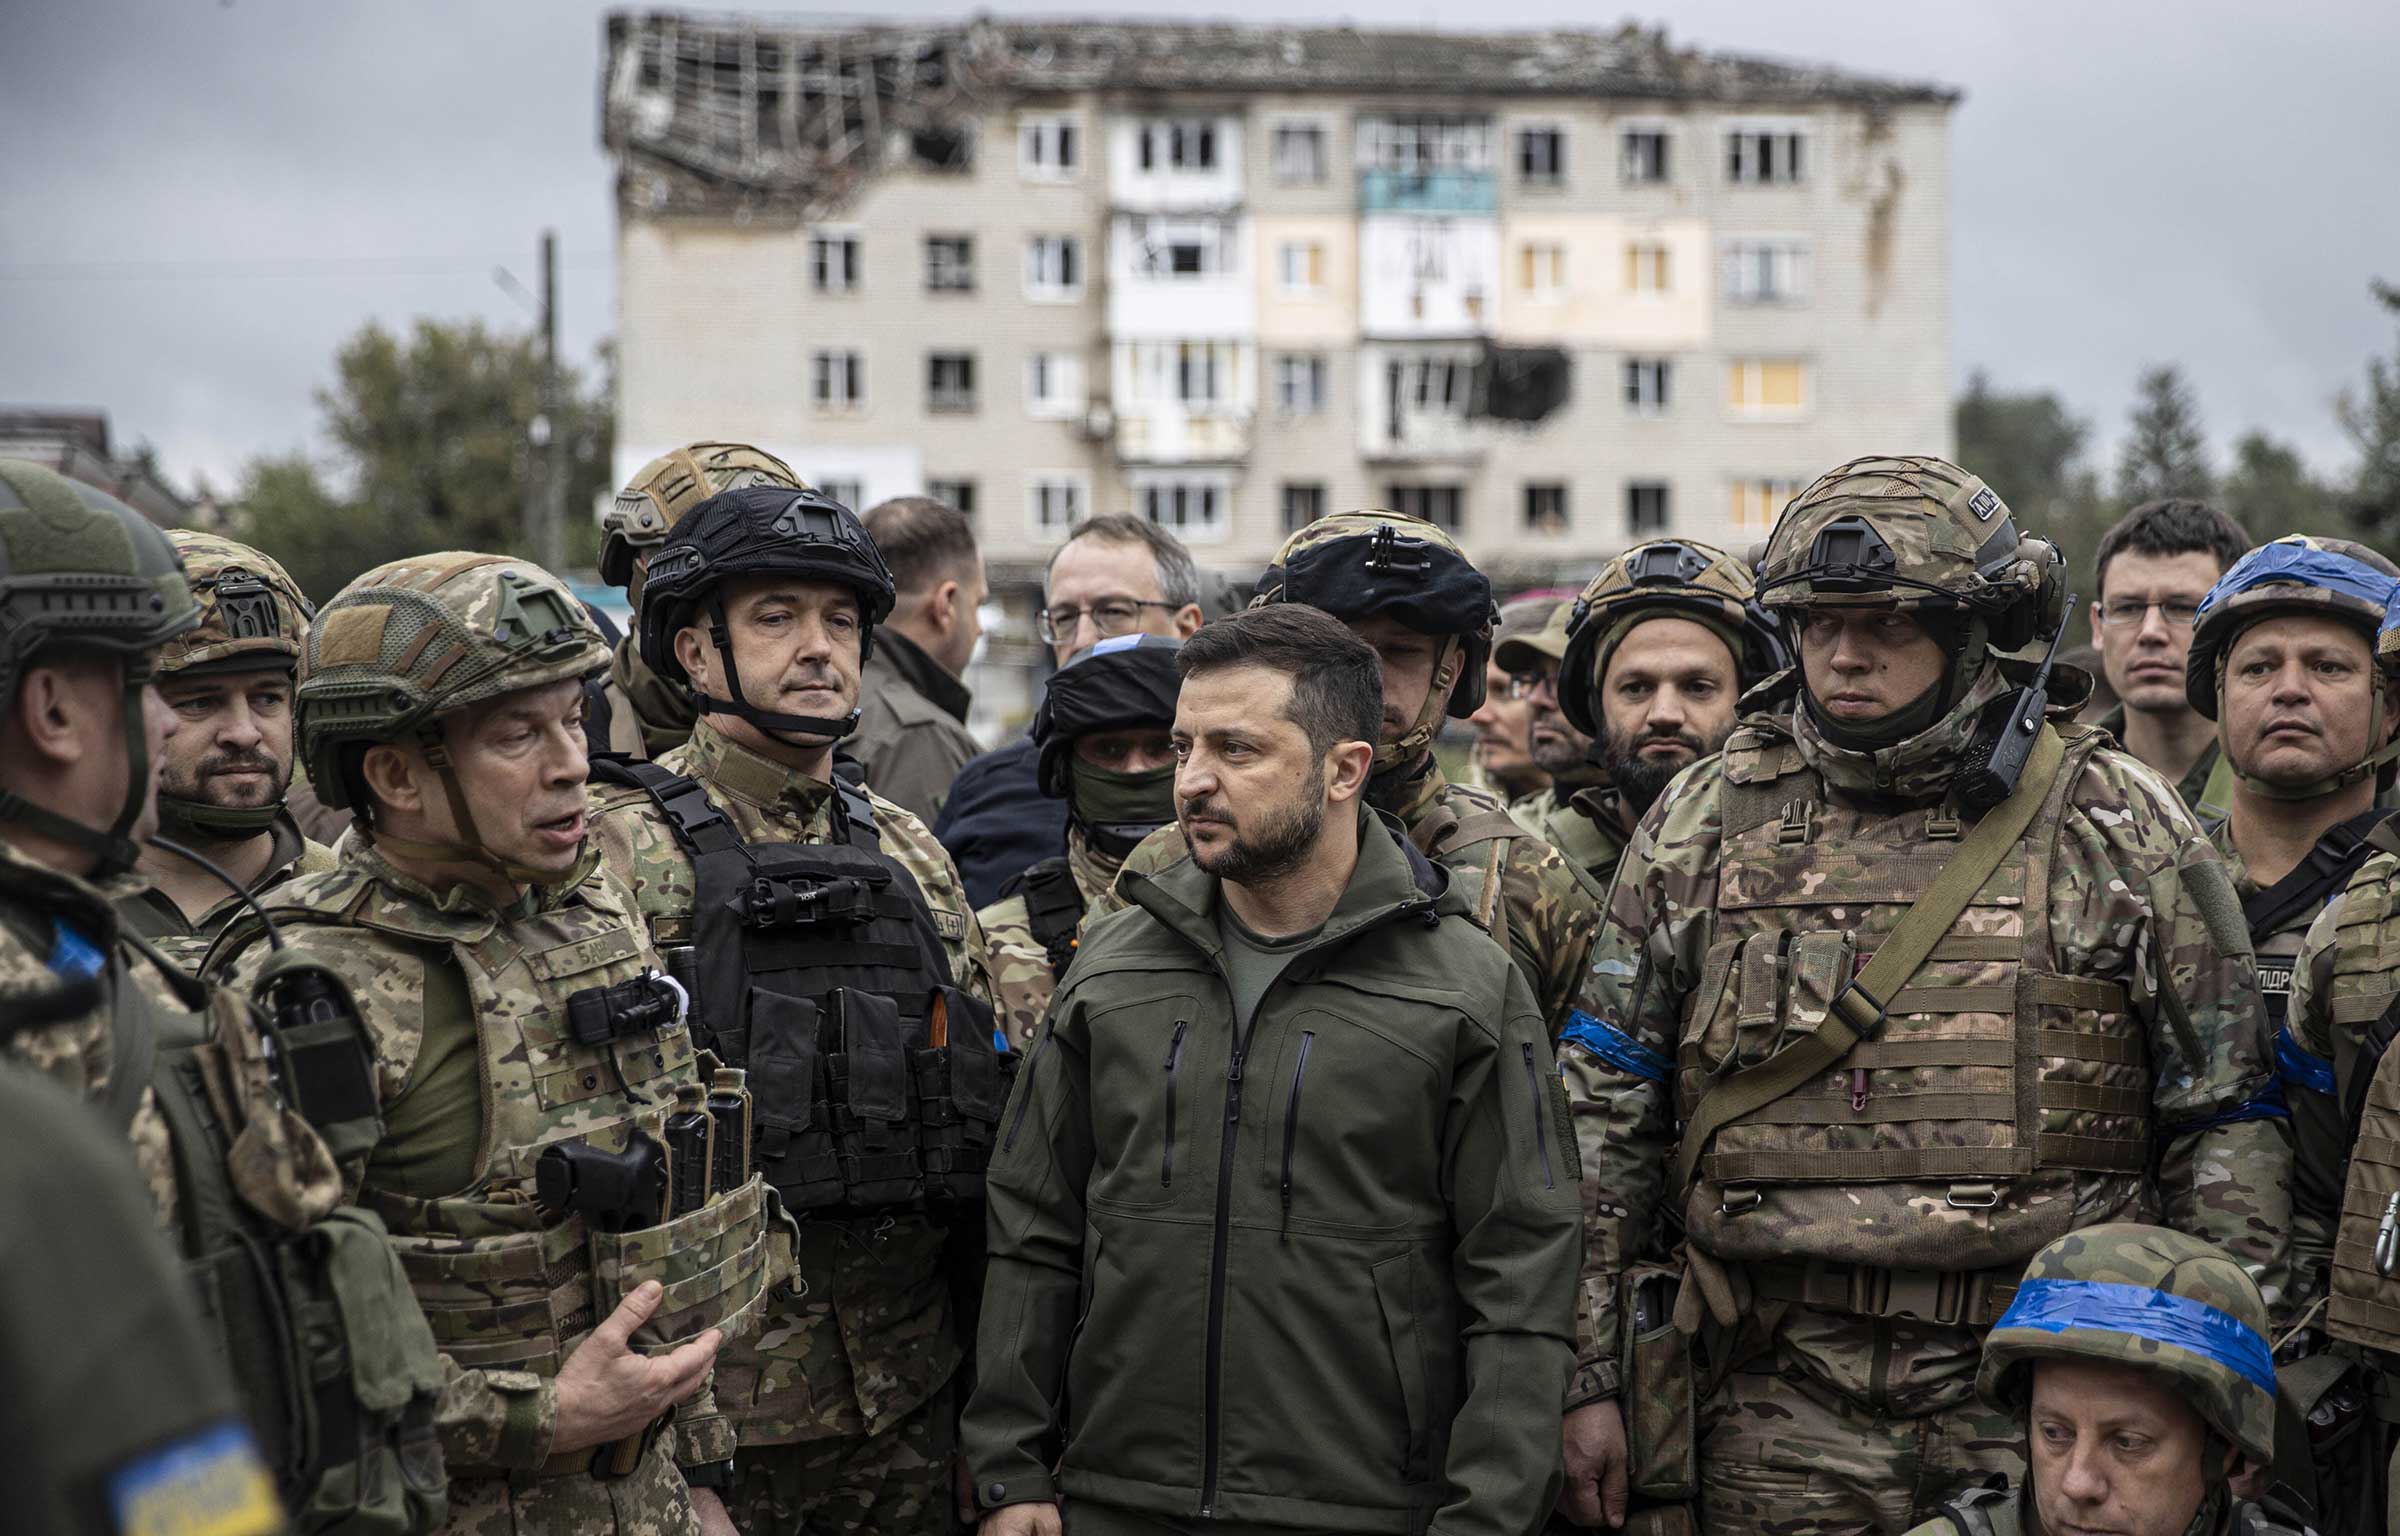 Ukrainian President Volodymyr Zelensky attends a flag hoisting ceremony in Izyum after the Ukrainian forces took back control of the city from the Russians. (Metin Aktas–Anadolu Agency/Getty Images)